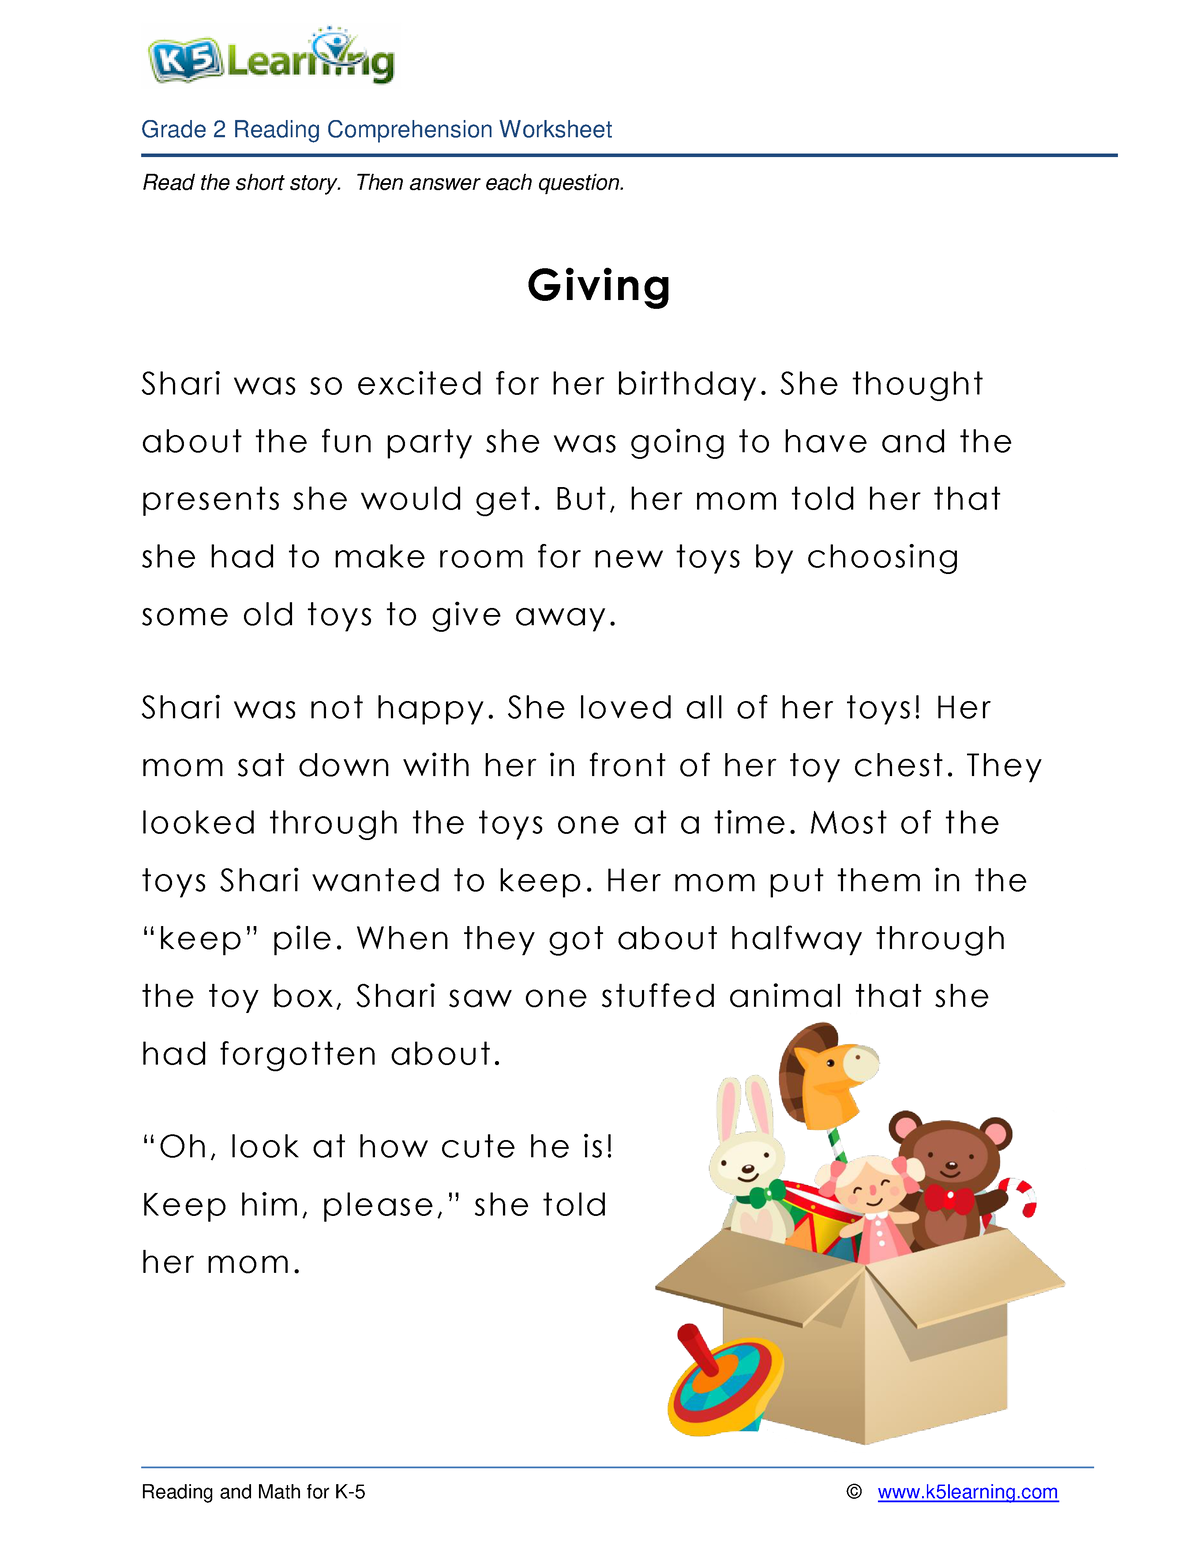 2nd grade 2 reading giving - Read the short story. Then answer each ...